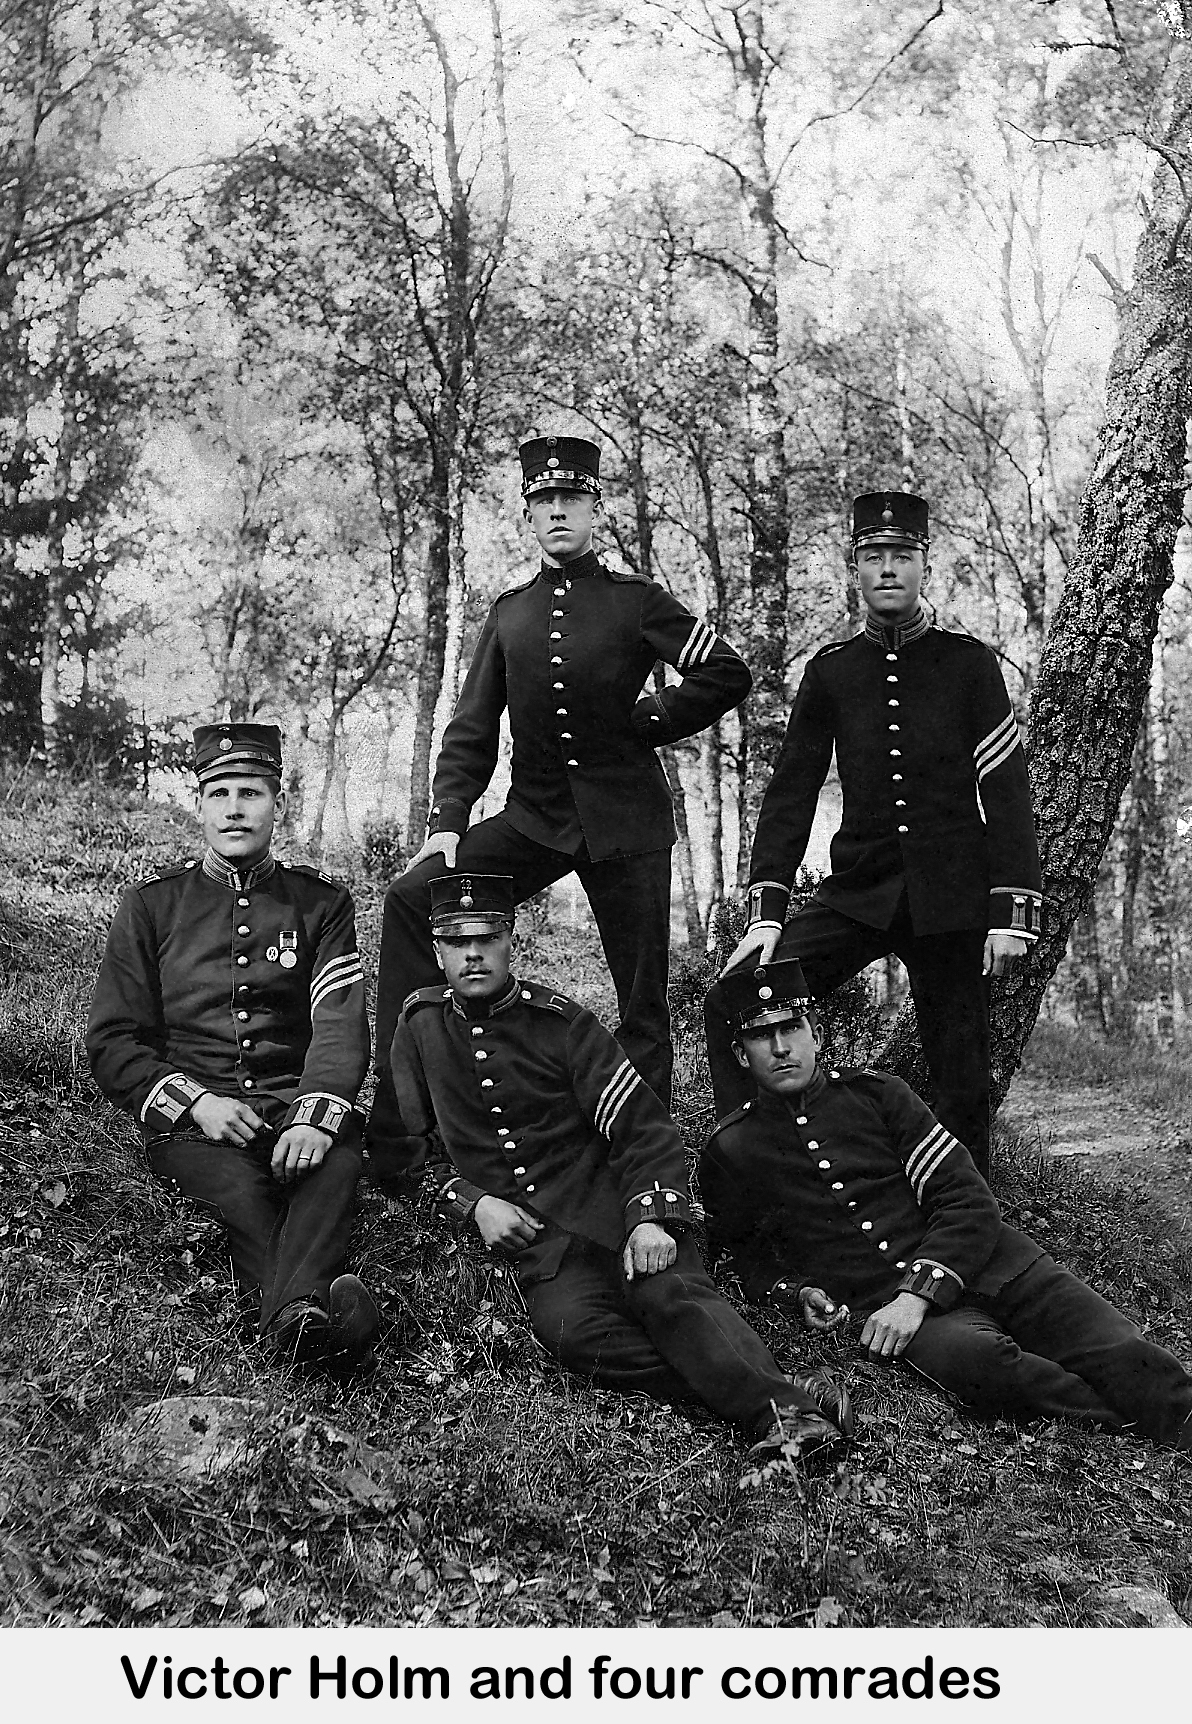 Victor seated on the ground with four other sargents, in a forest